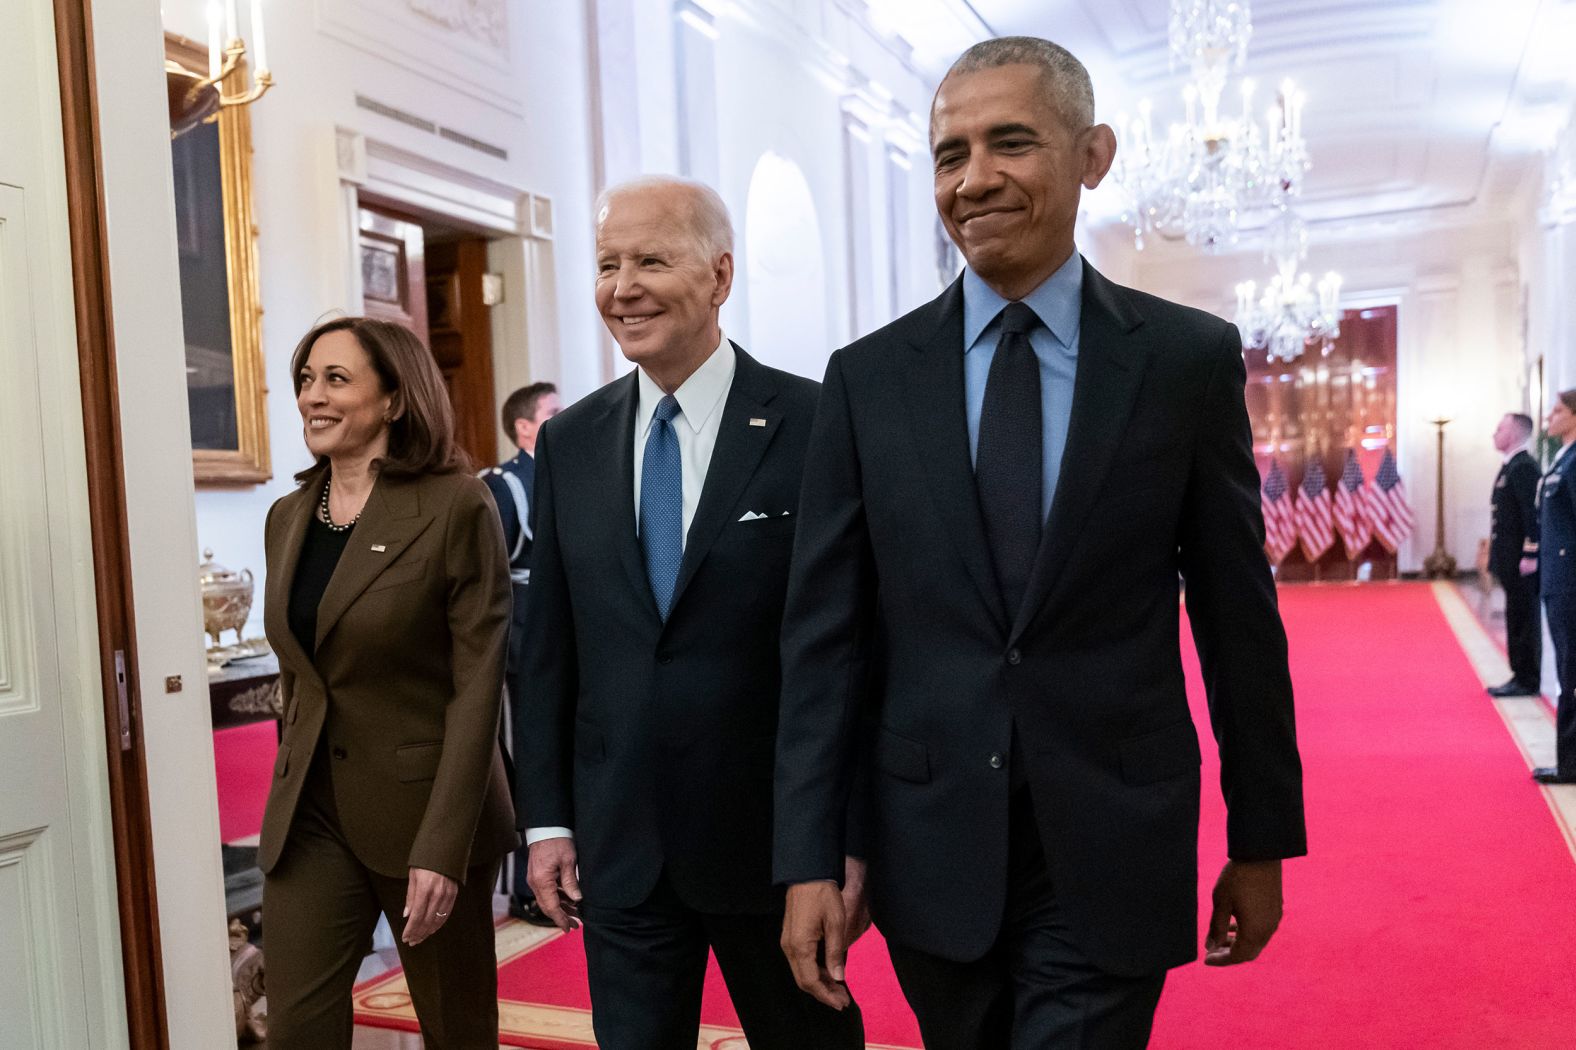 Harris, Biden and Obama walk to the event in  the East Room.